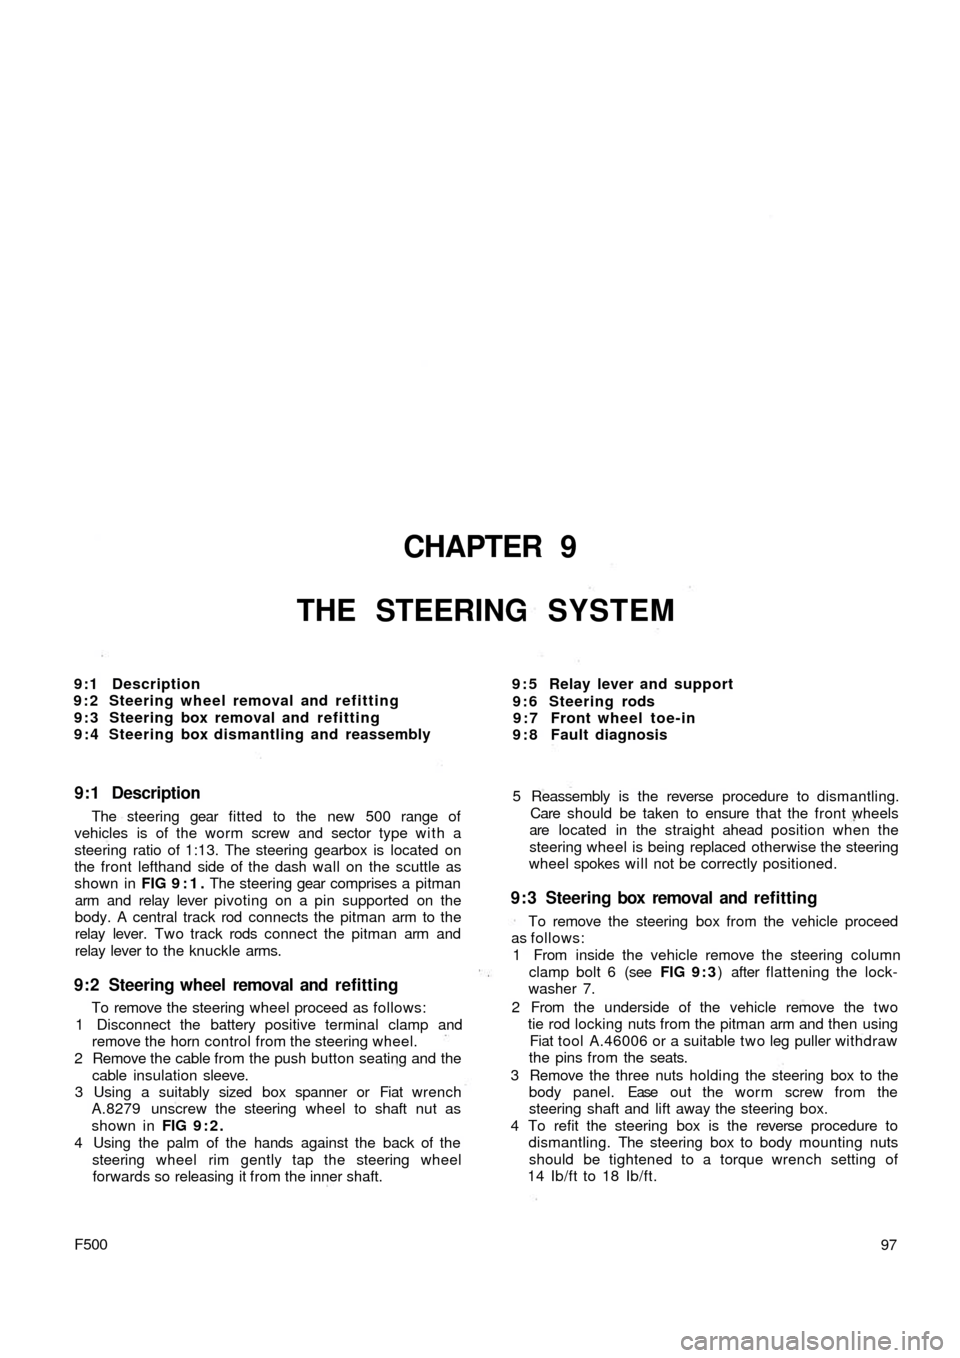 FIAT 500 1958 1.G Workshop Manual CHAPTER 9
THE STEERING SYSTEM
9 : 5 Relay lever and support
9 : 6 Steering rods
9 : 7 Front wheel toe-in
9 : 8 Fault diagnosis 9:1 Description
9 : 2 Steering wheel removal and refitting
9 : 3 Steering